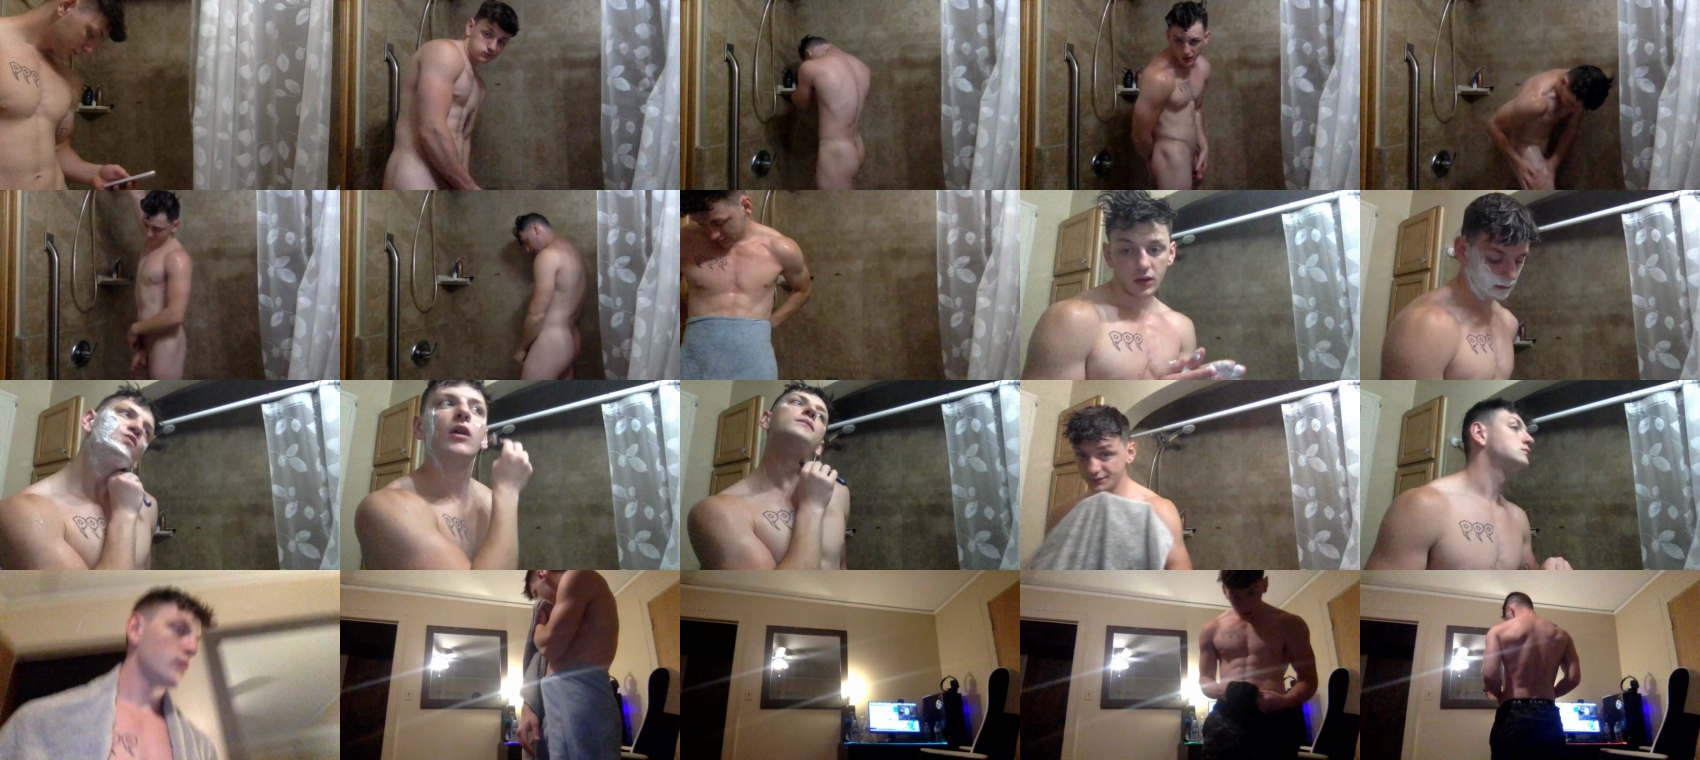 sexylax69 beauty CAM SHOW @ Chaturbate 26-05-2022